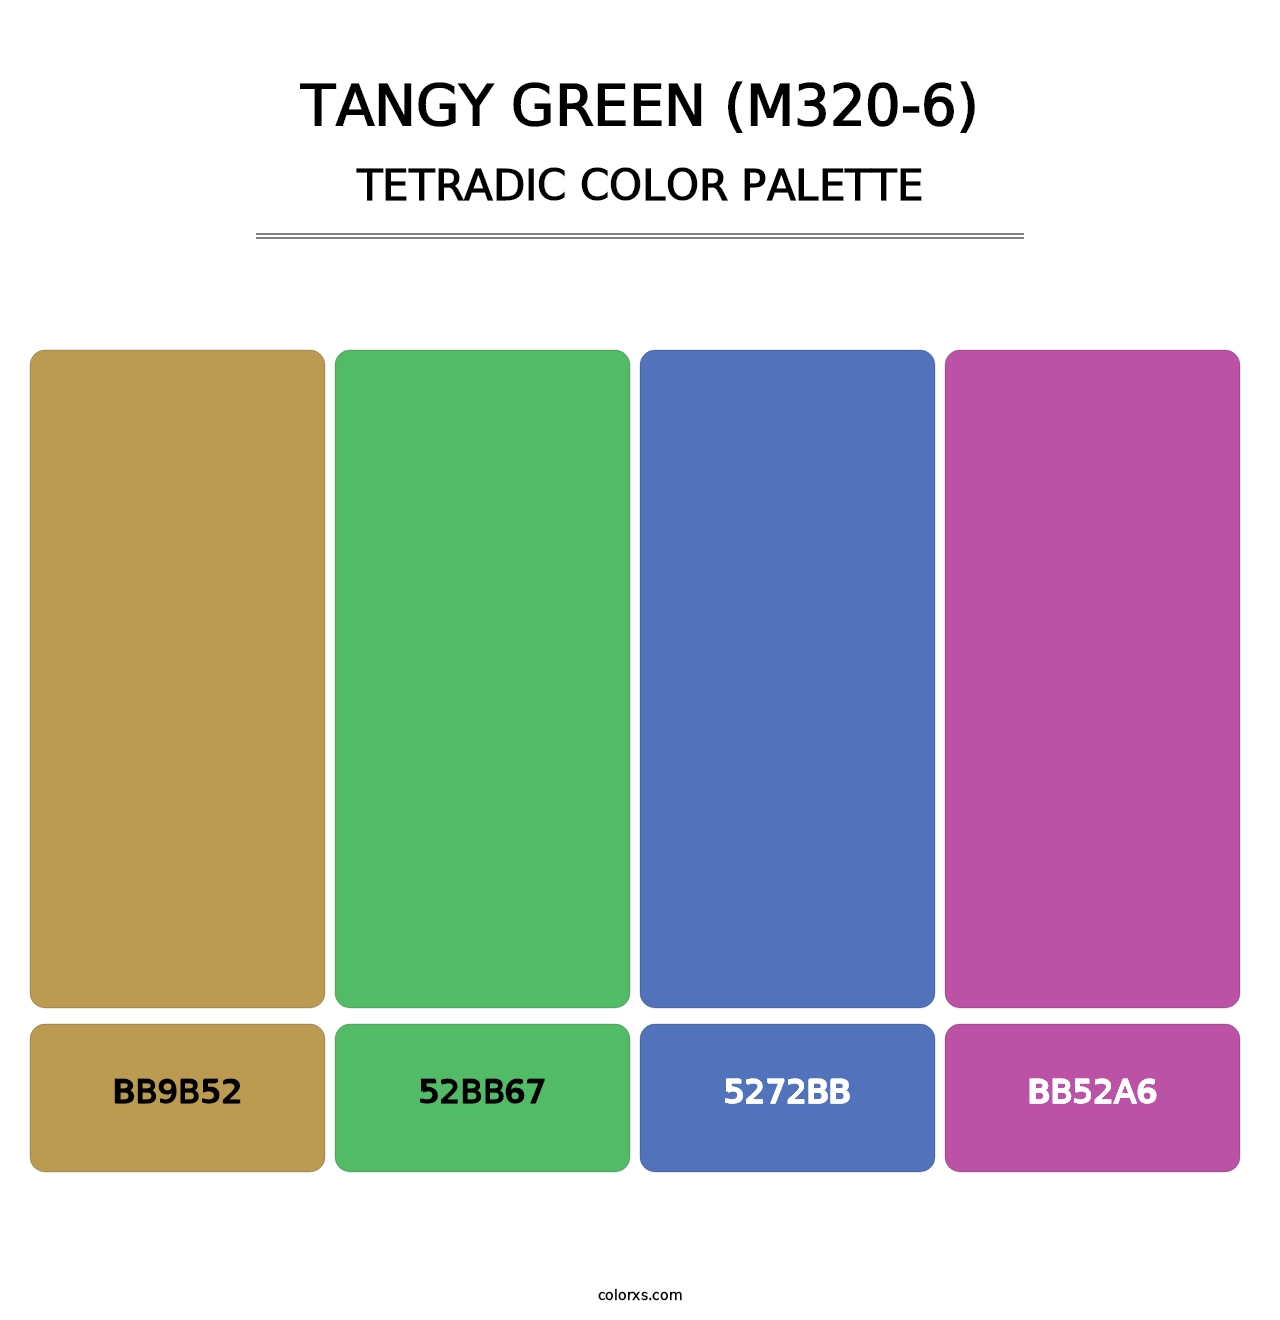 Tangy Green (M320-6) - Tetradic Color Palette